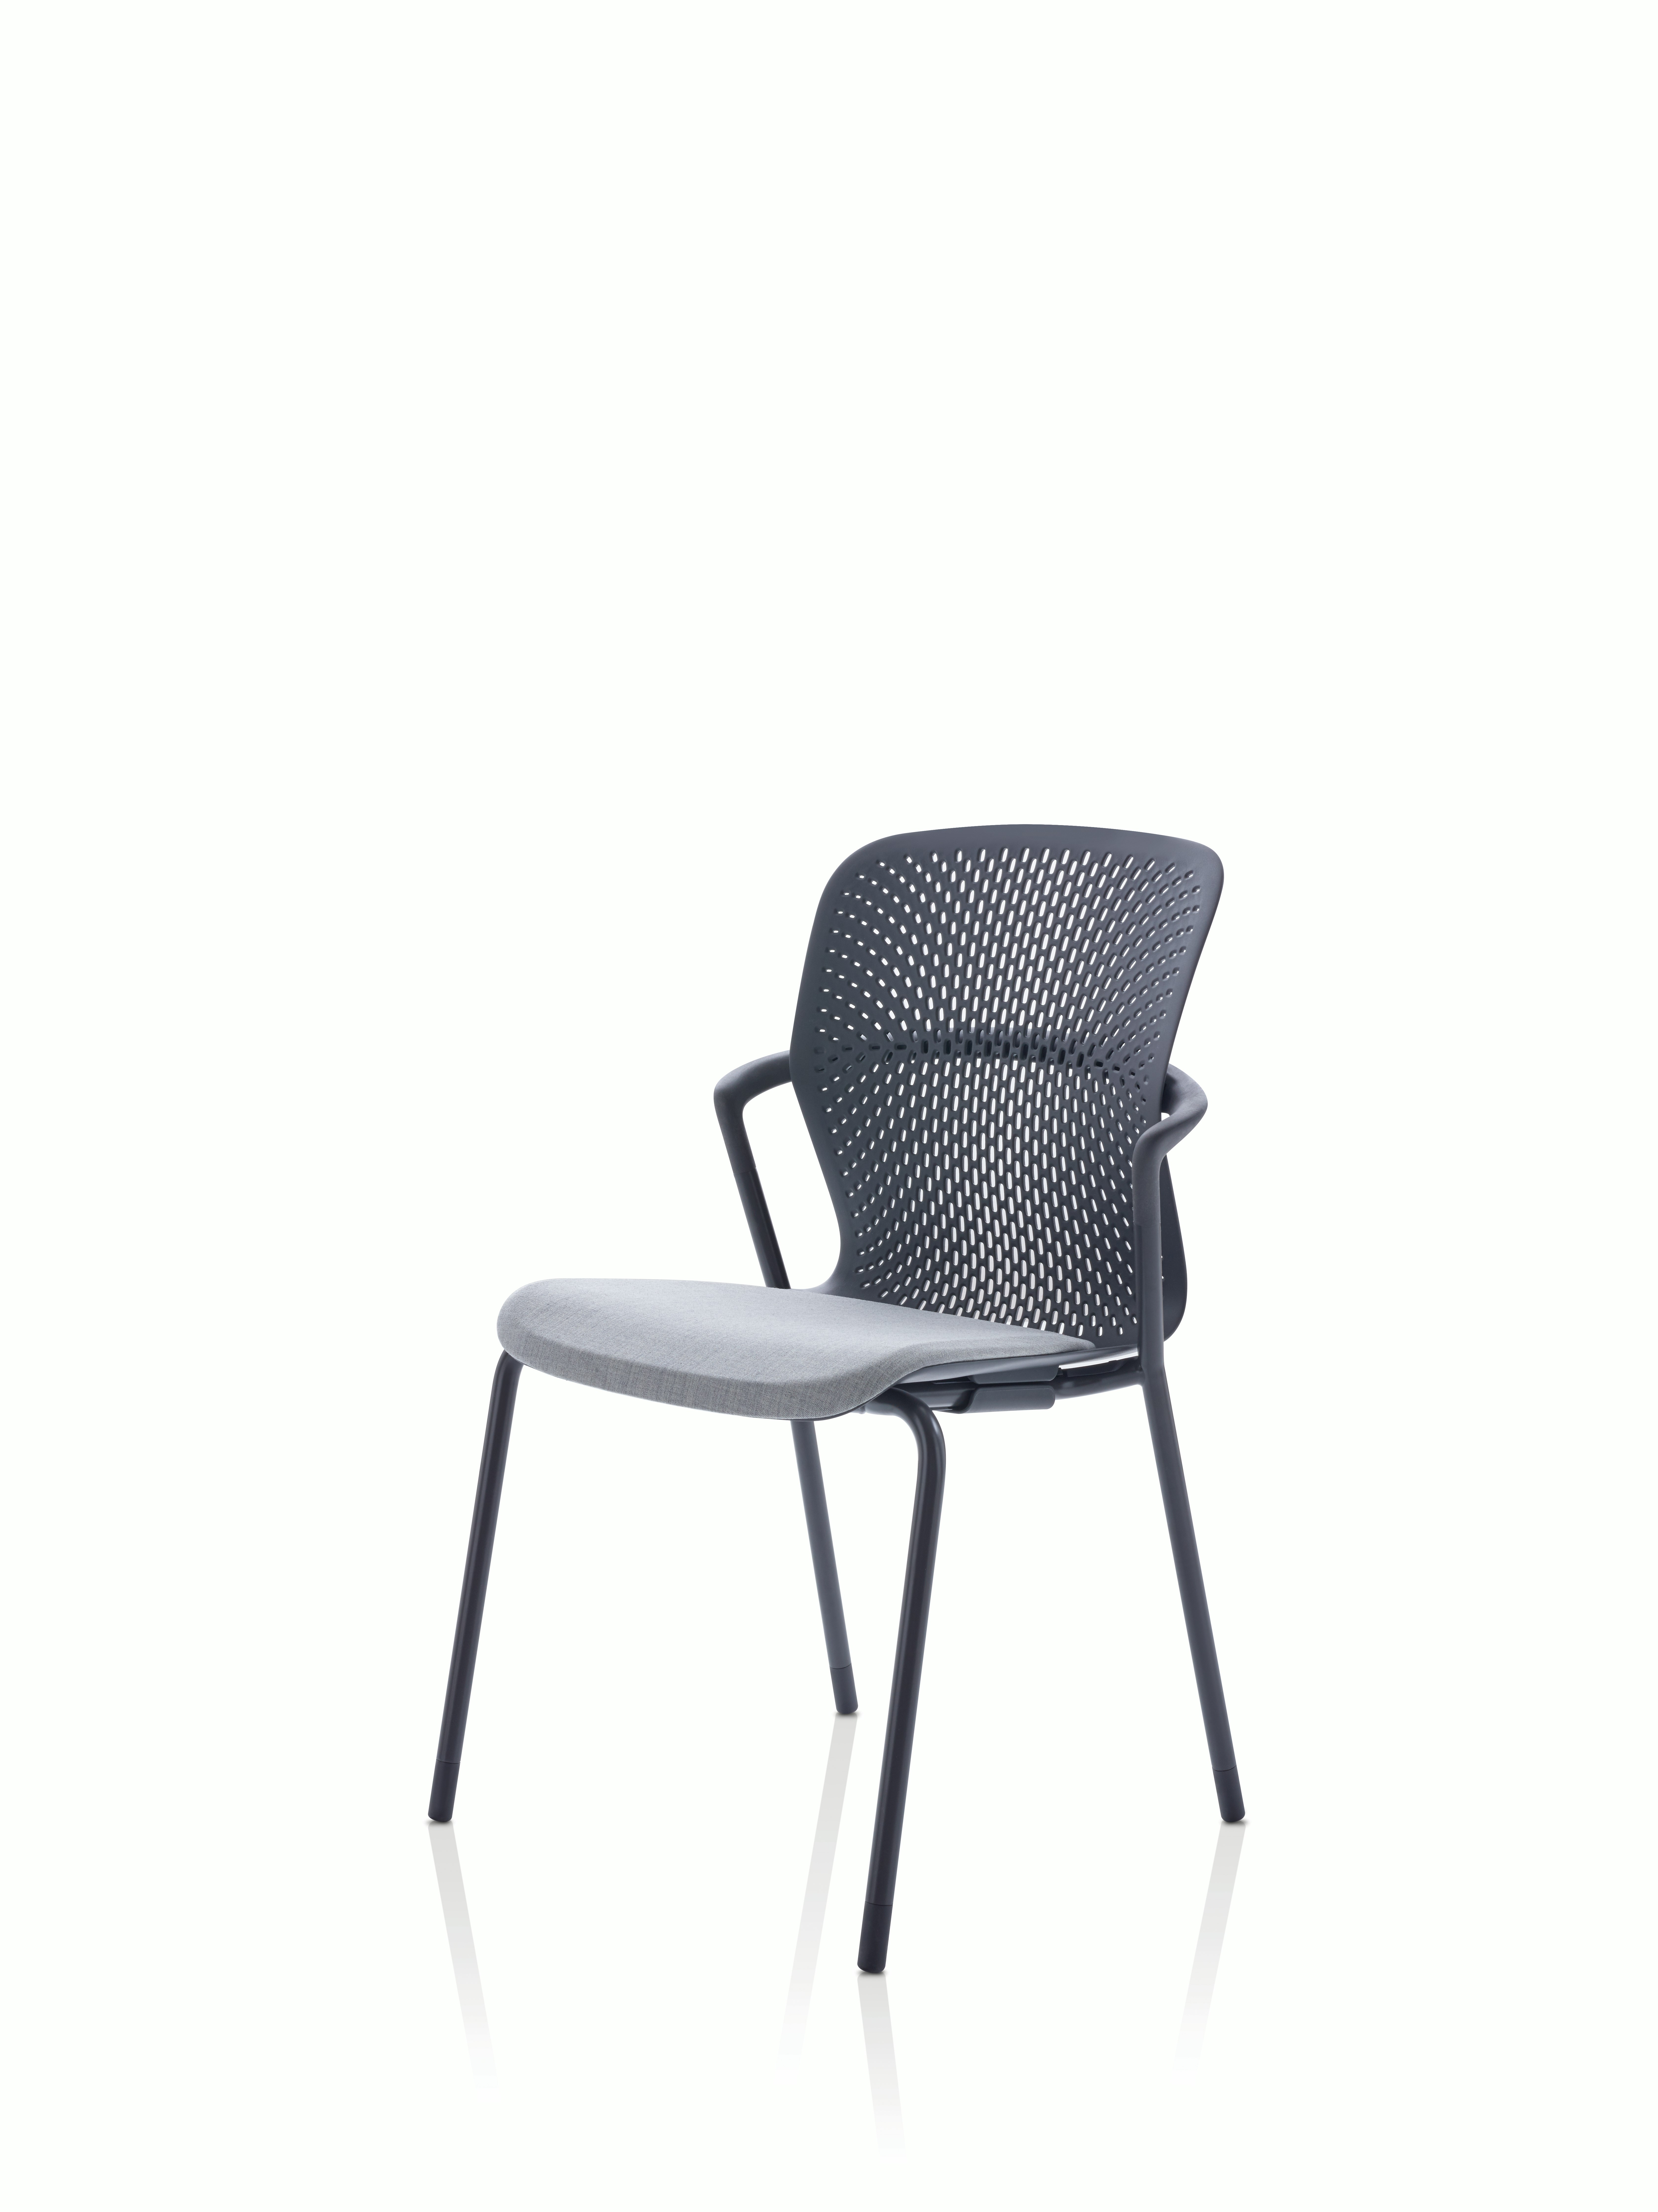 fire gange renere aluminium ecomedes Sustainable Product Catalog | Keyn – 4-Leg Base Chair without Arms  / KNN4SN by Herman Miller